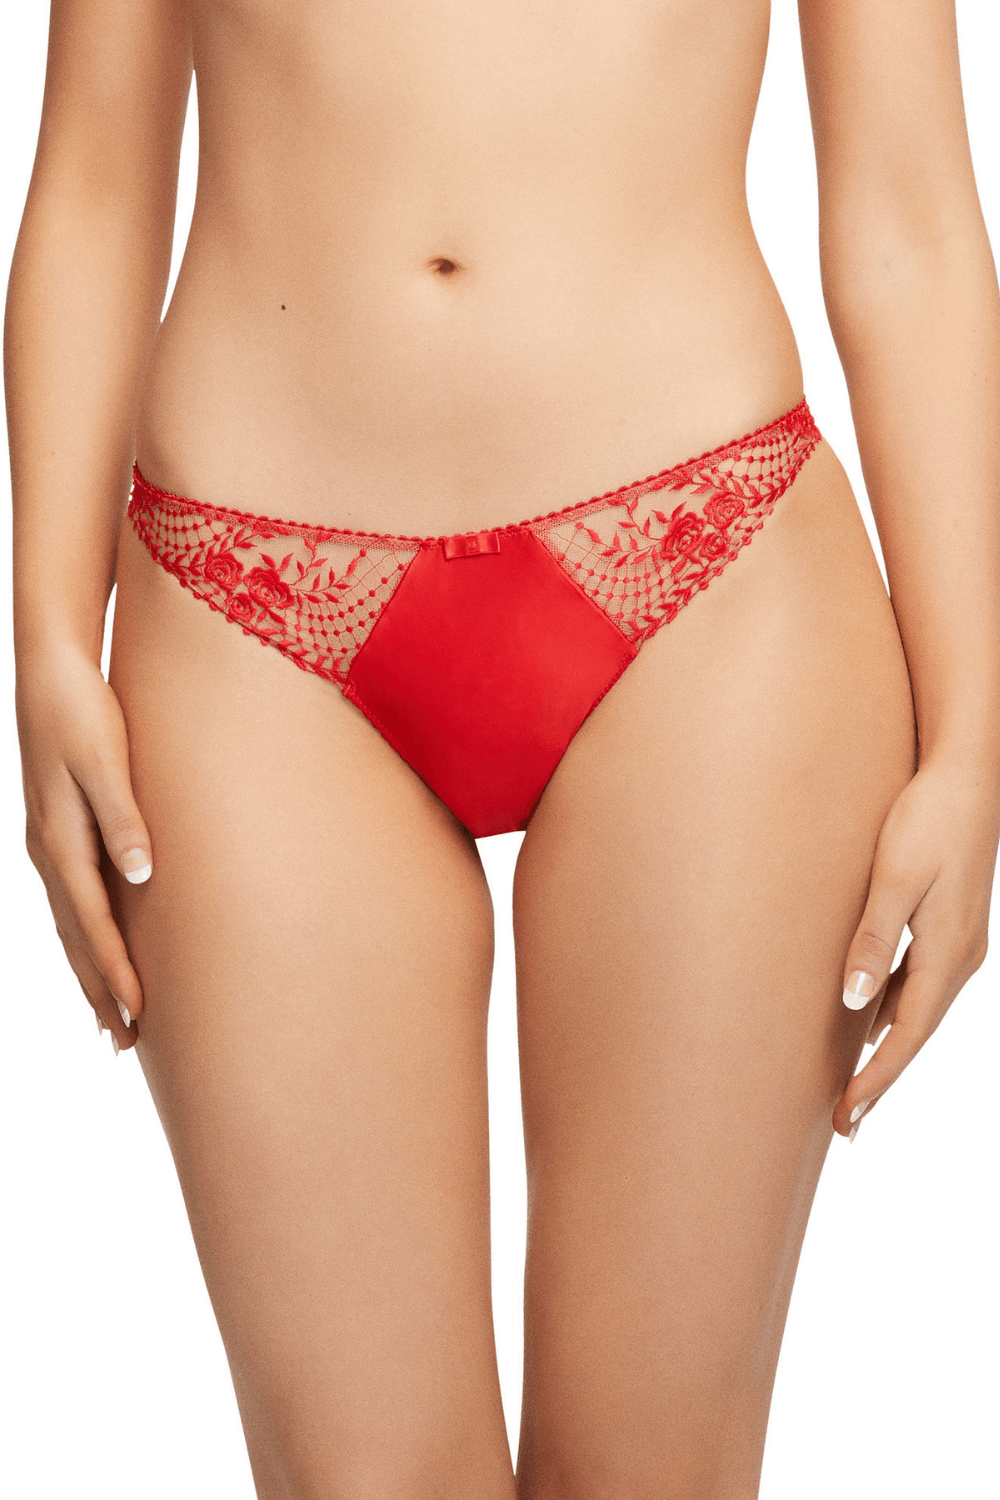 JULIE'S ROSES G-STRING ROSE RED - Expect Lace